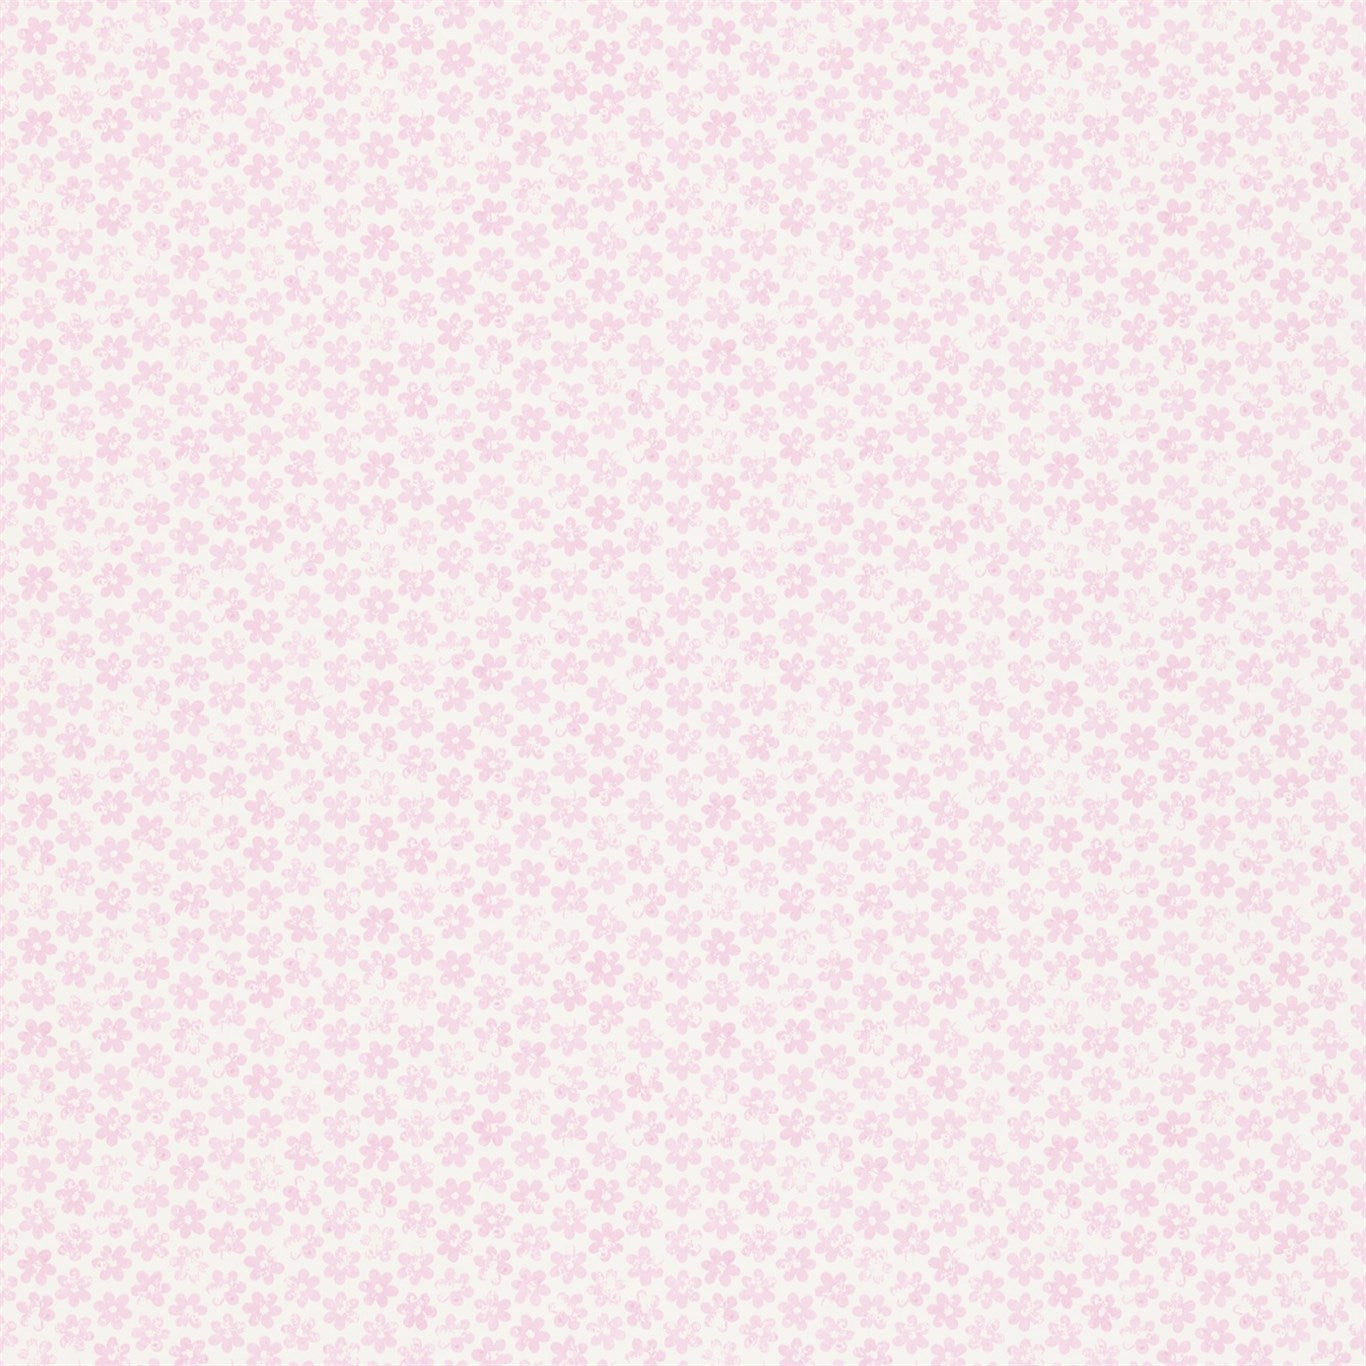 Ditsy Daisy Soft Pink Wallpaper HKID110550 by Harlequin